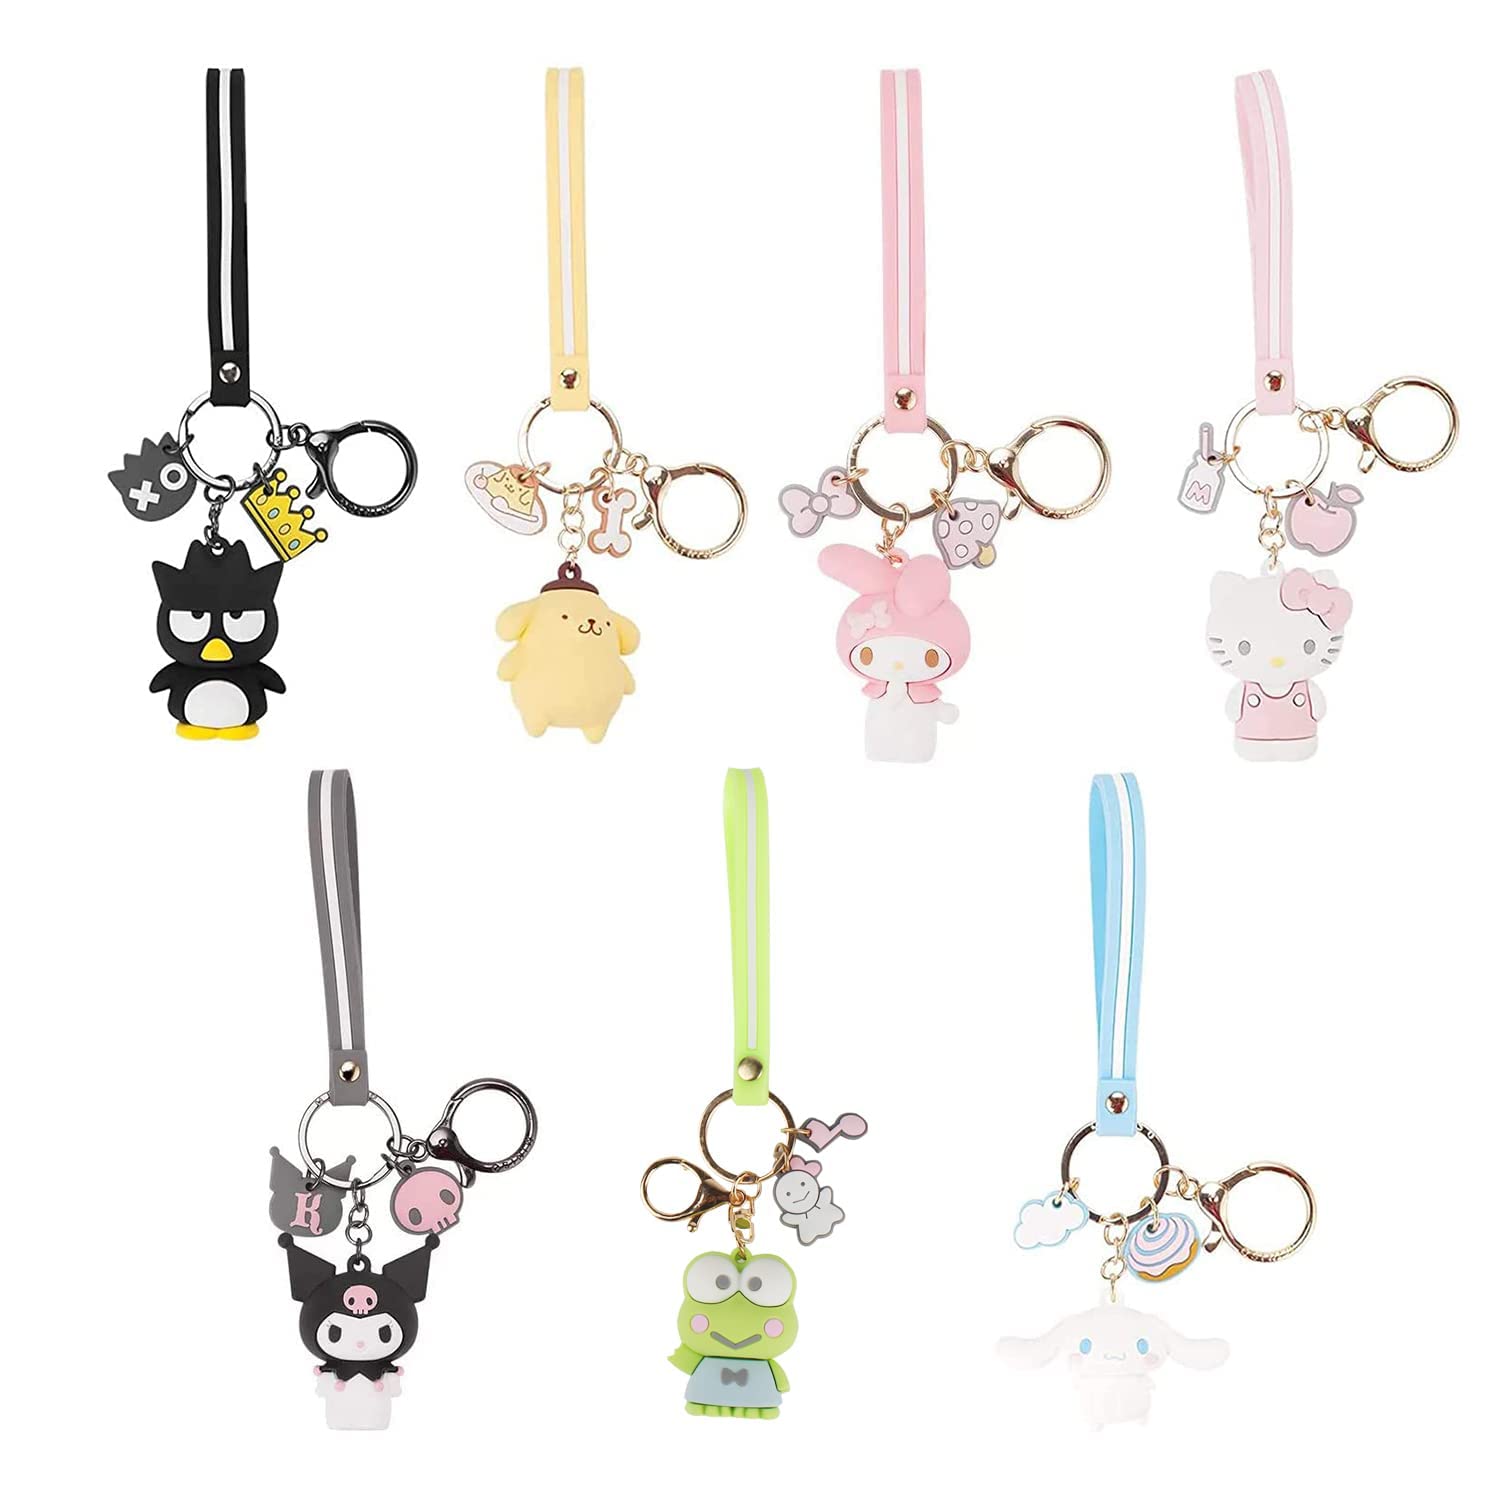 Update 80+ anime keychain charms latest - in.cdgdbentre